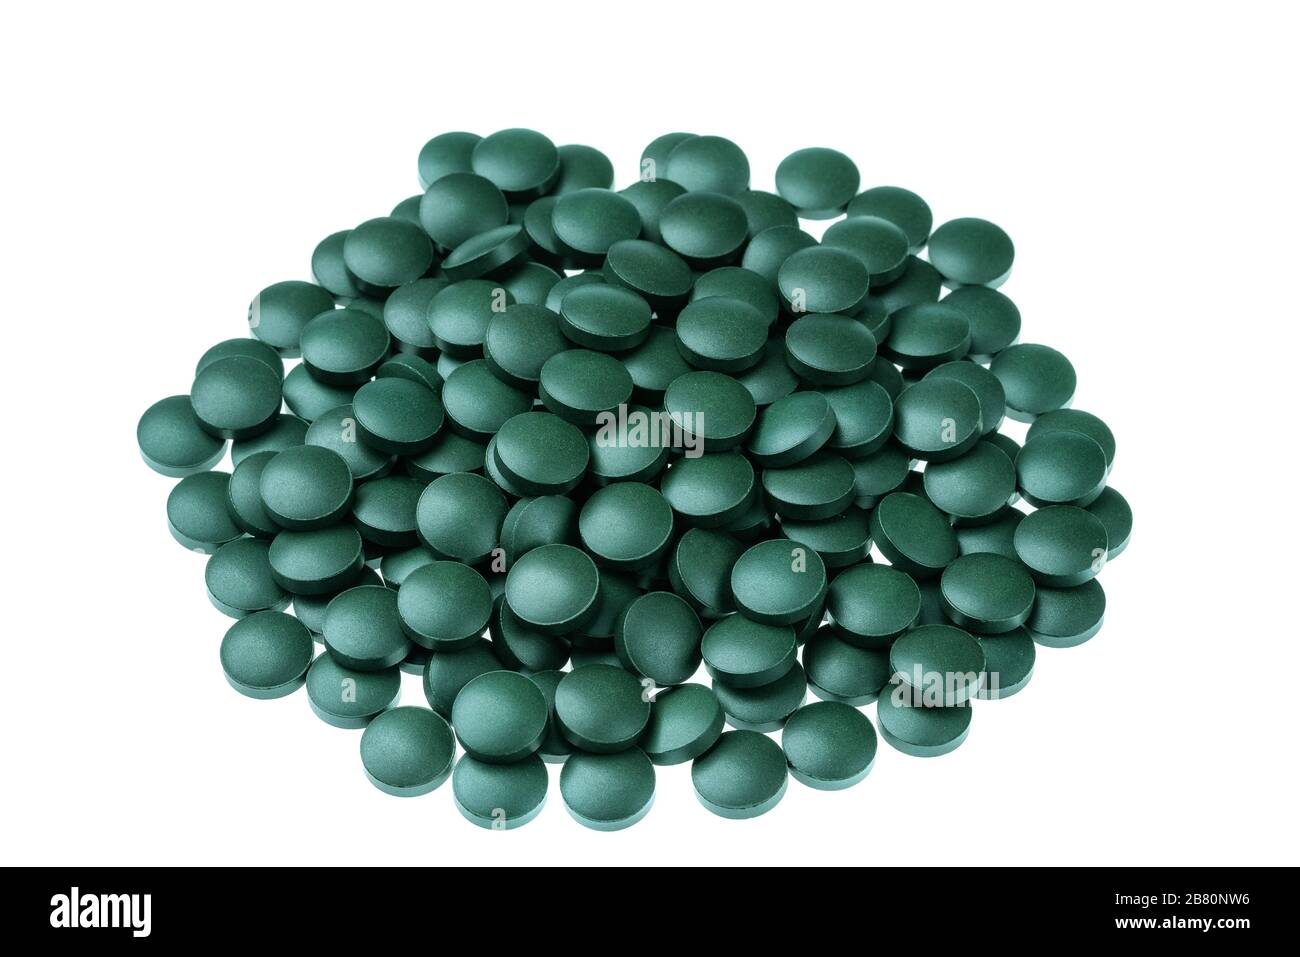 Vitamin and mineral supplements for vegetarians spirulina in tablets on a white background, close-up Stock Photo